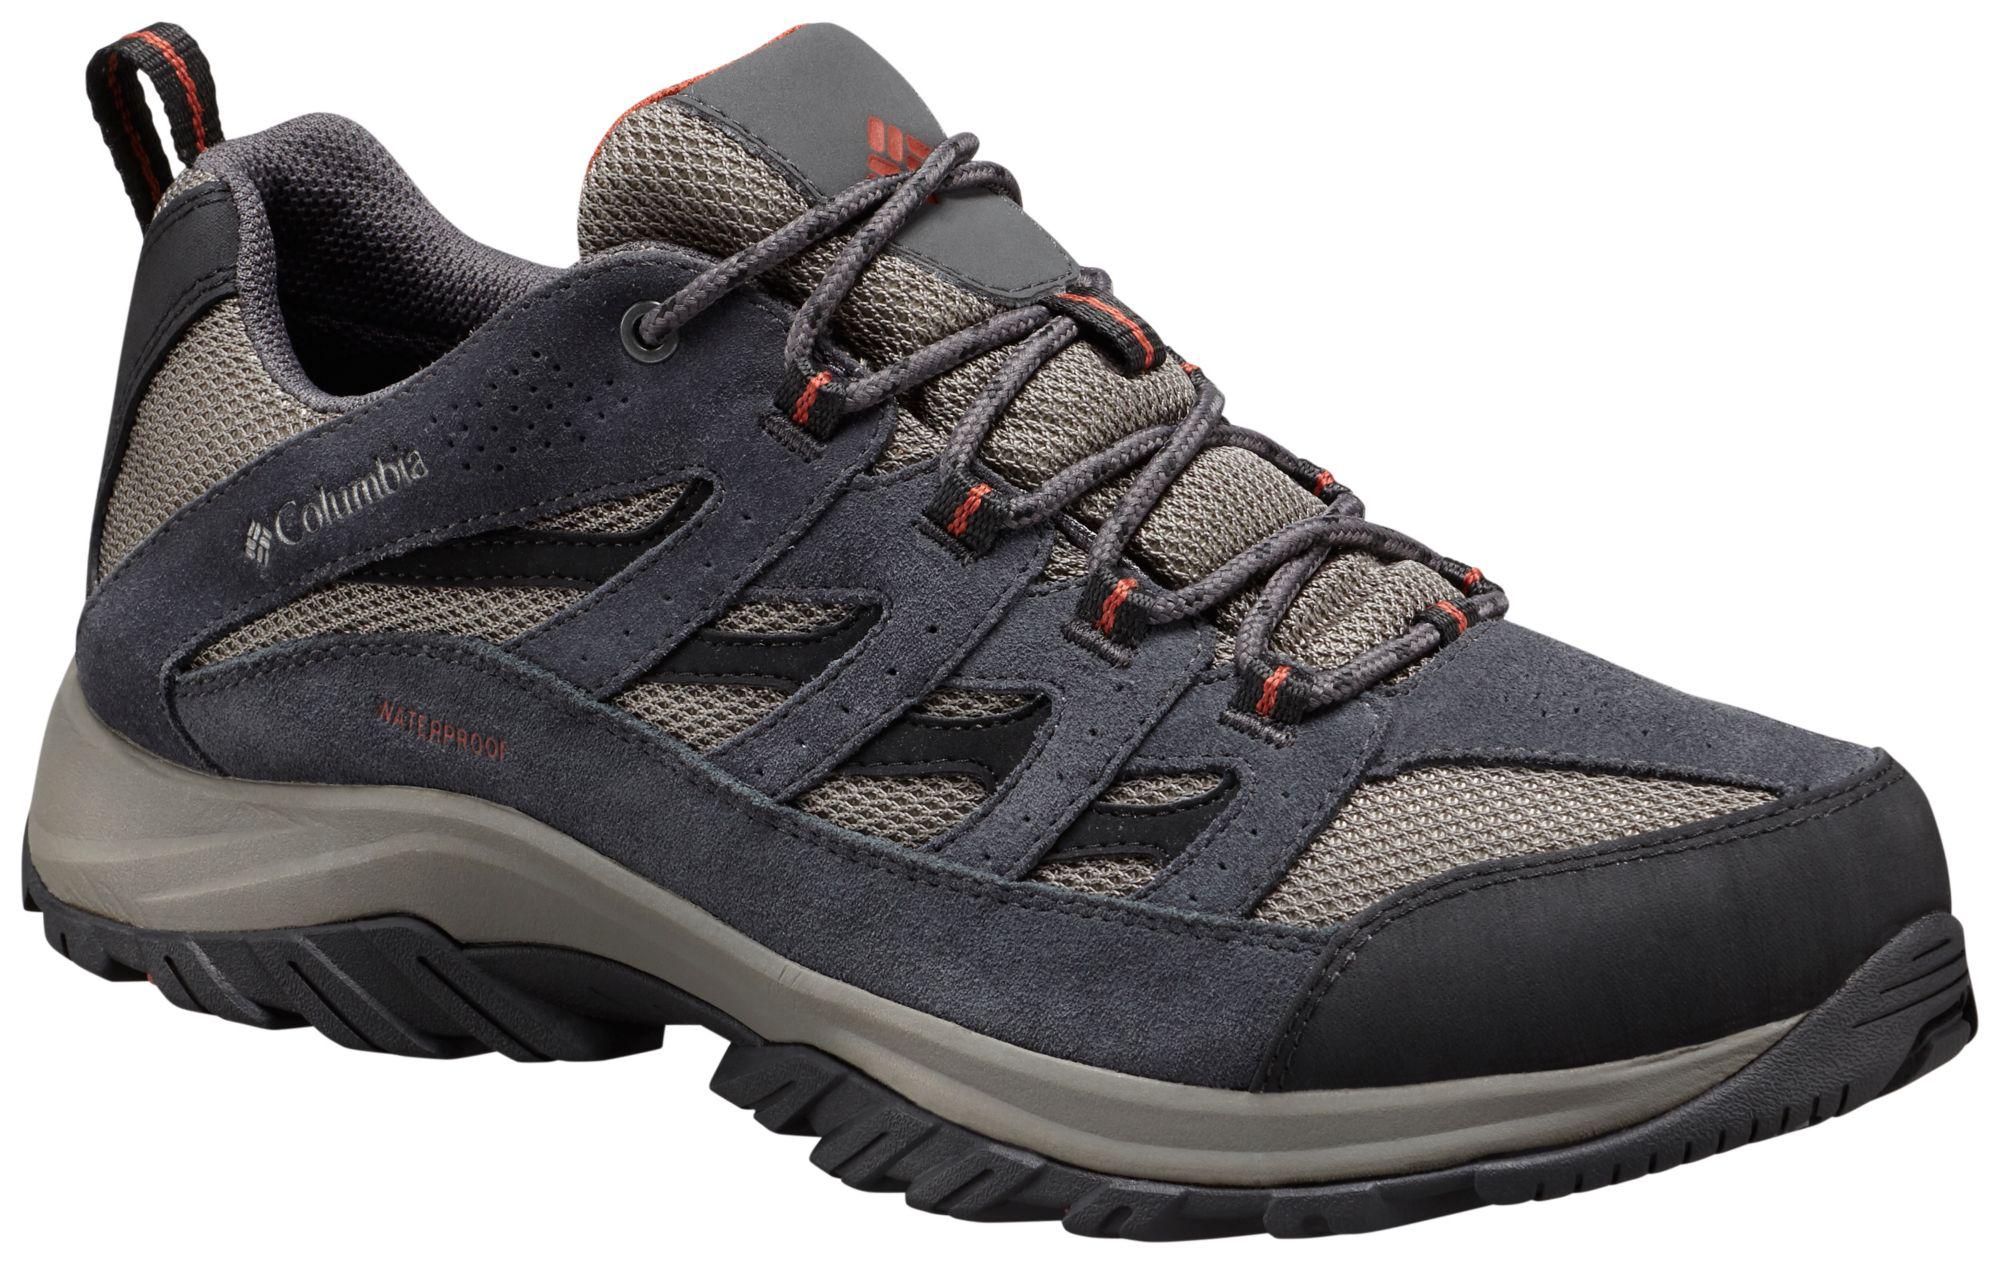 Columbia Crestwood Waterproof Hiking Shoes in Black for Men - Lyst